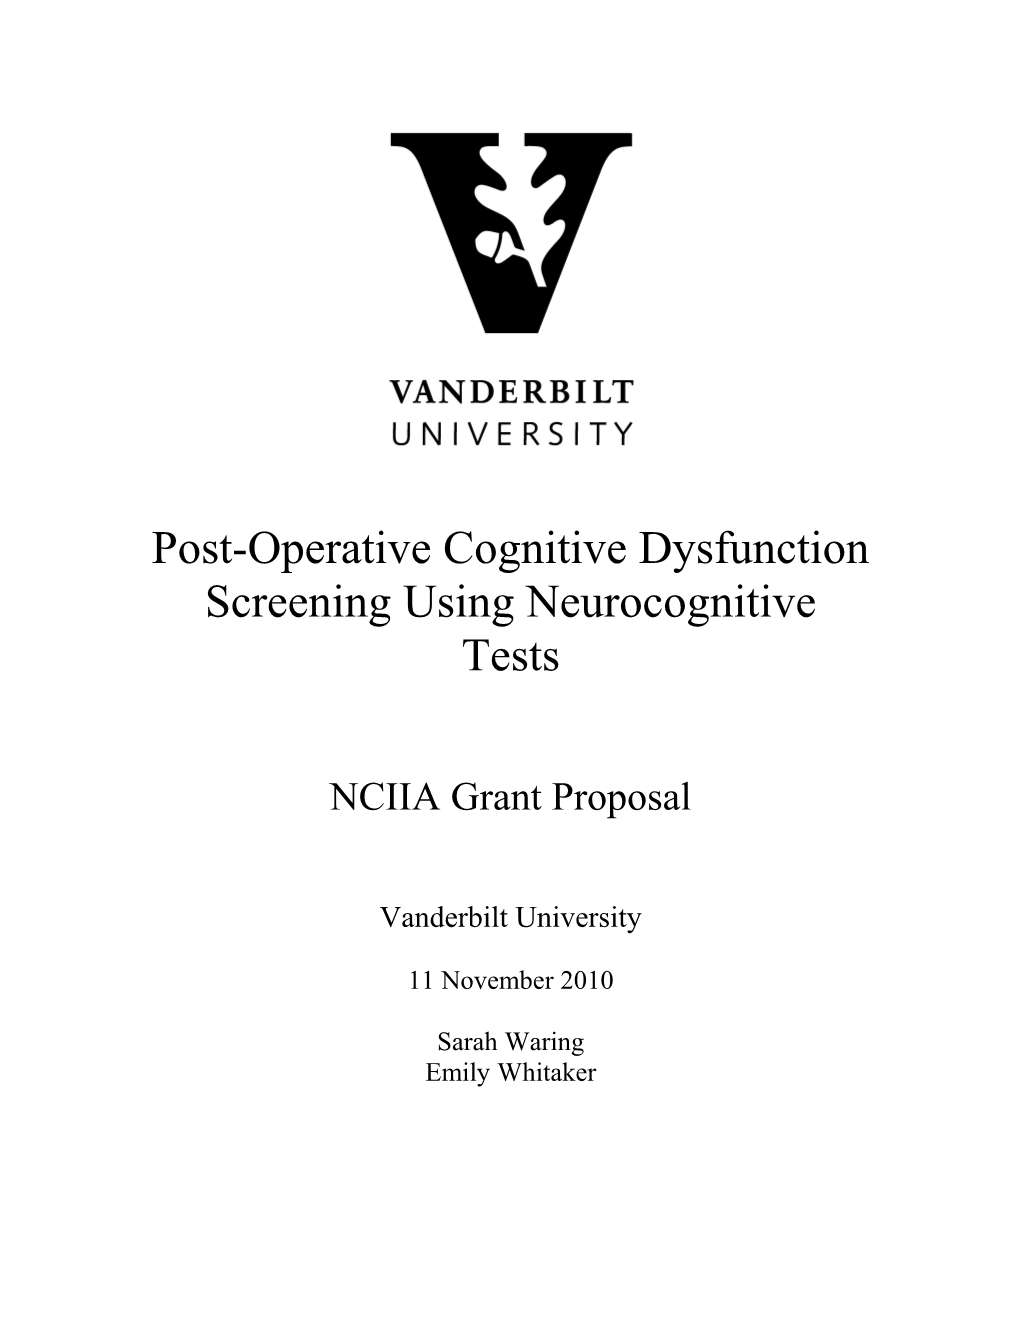 Post-Operative Cognitive Dysfunction Screening Using Neurocognitive Tests